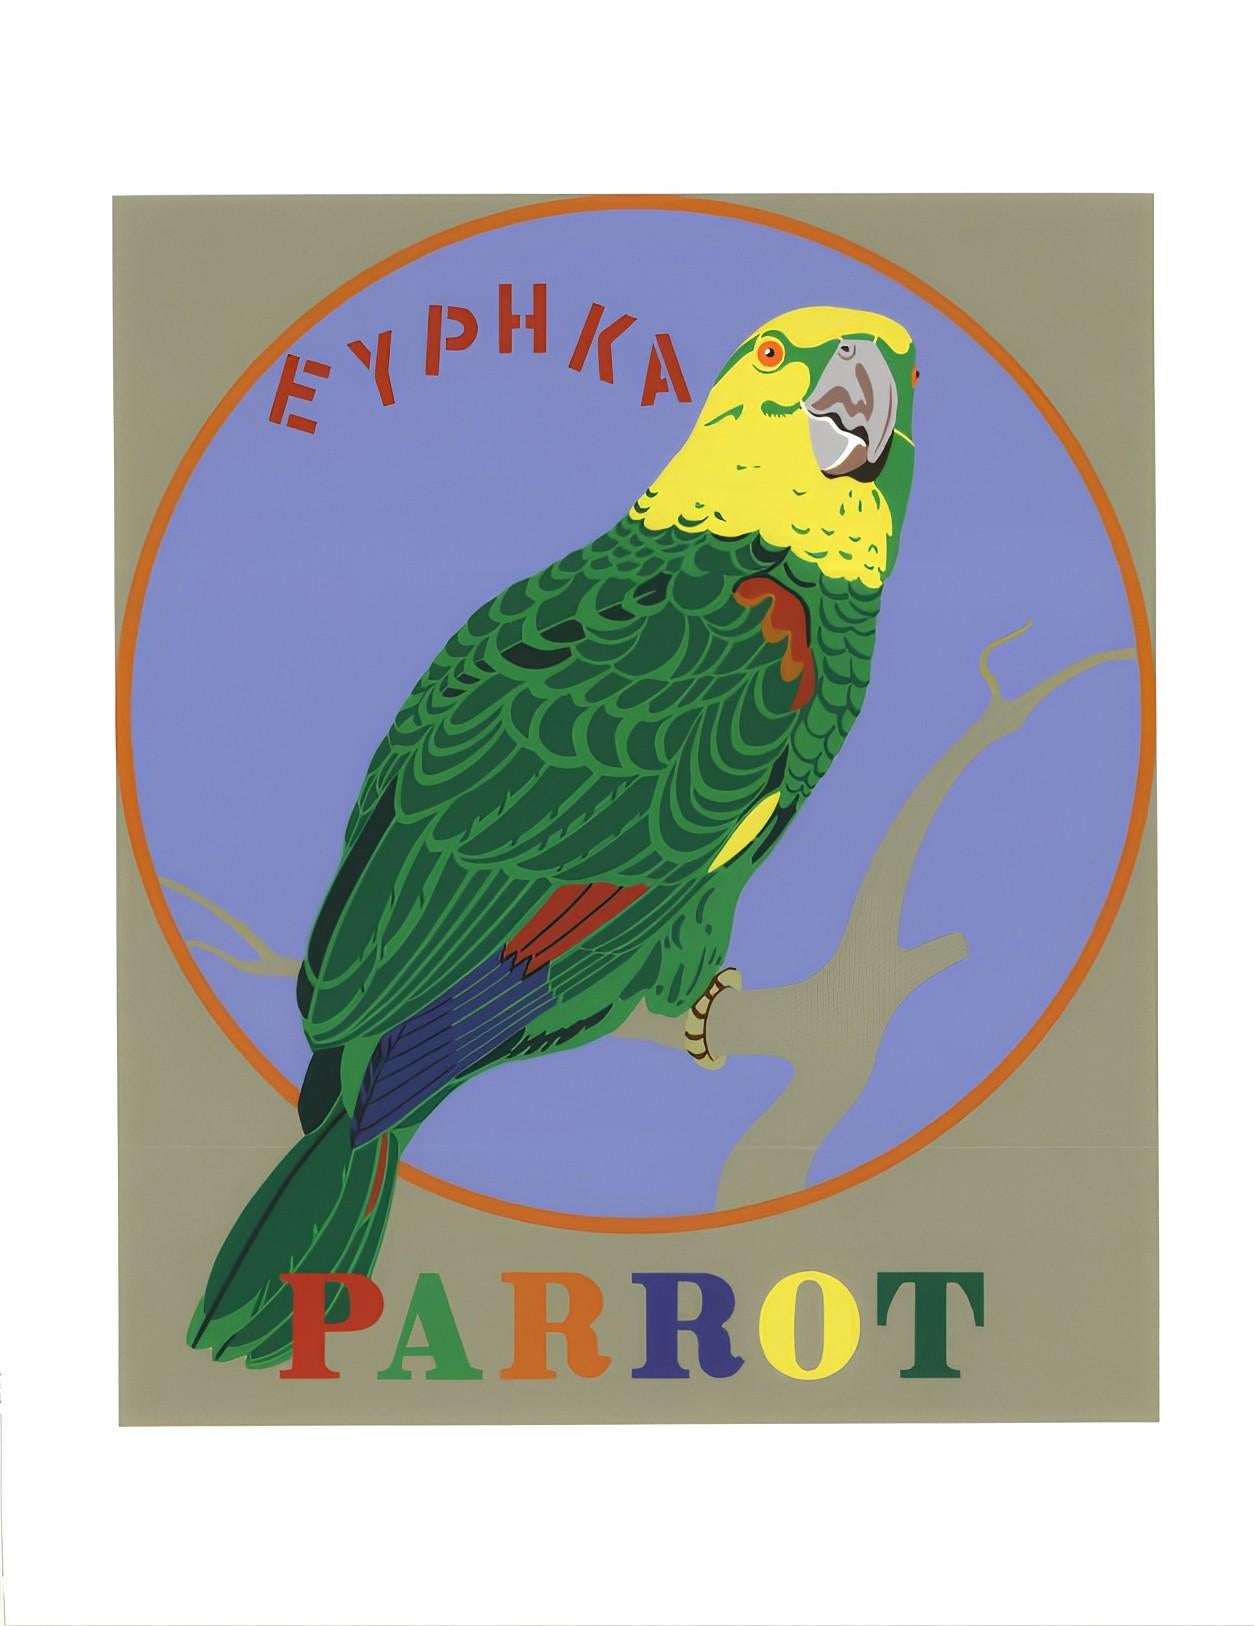 Parrot from The American Dream Portfolio - Print by Robert Indiana